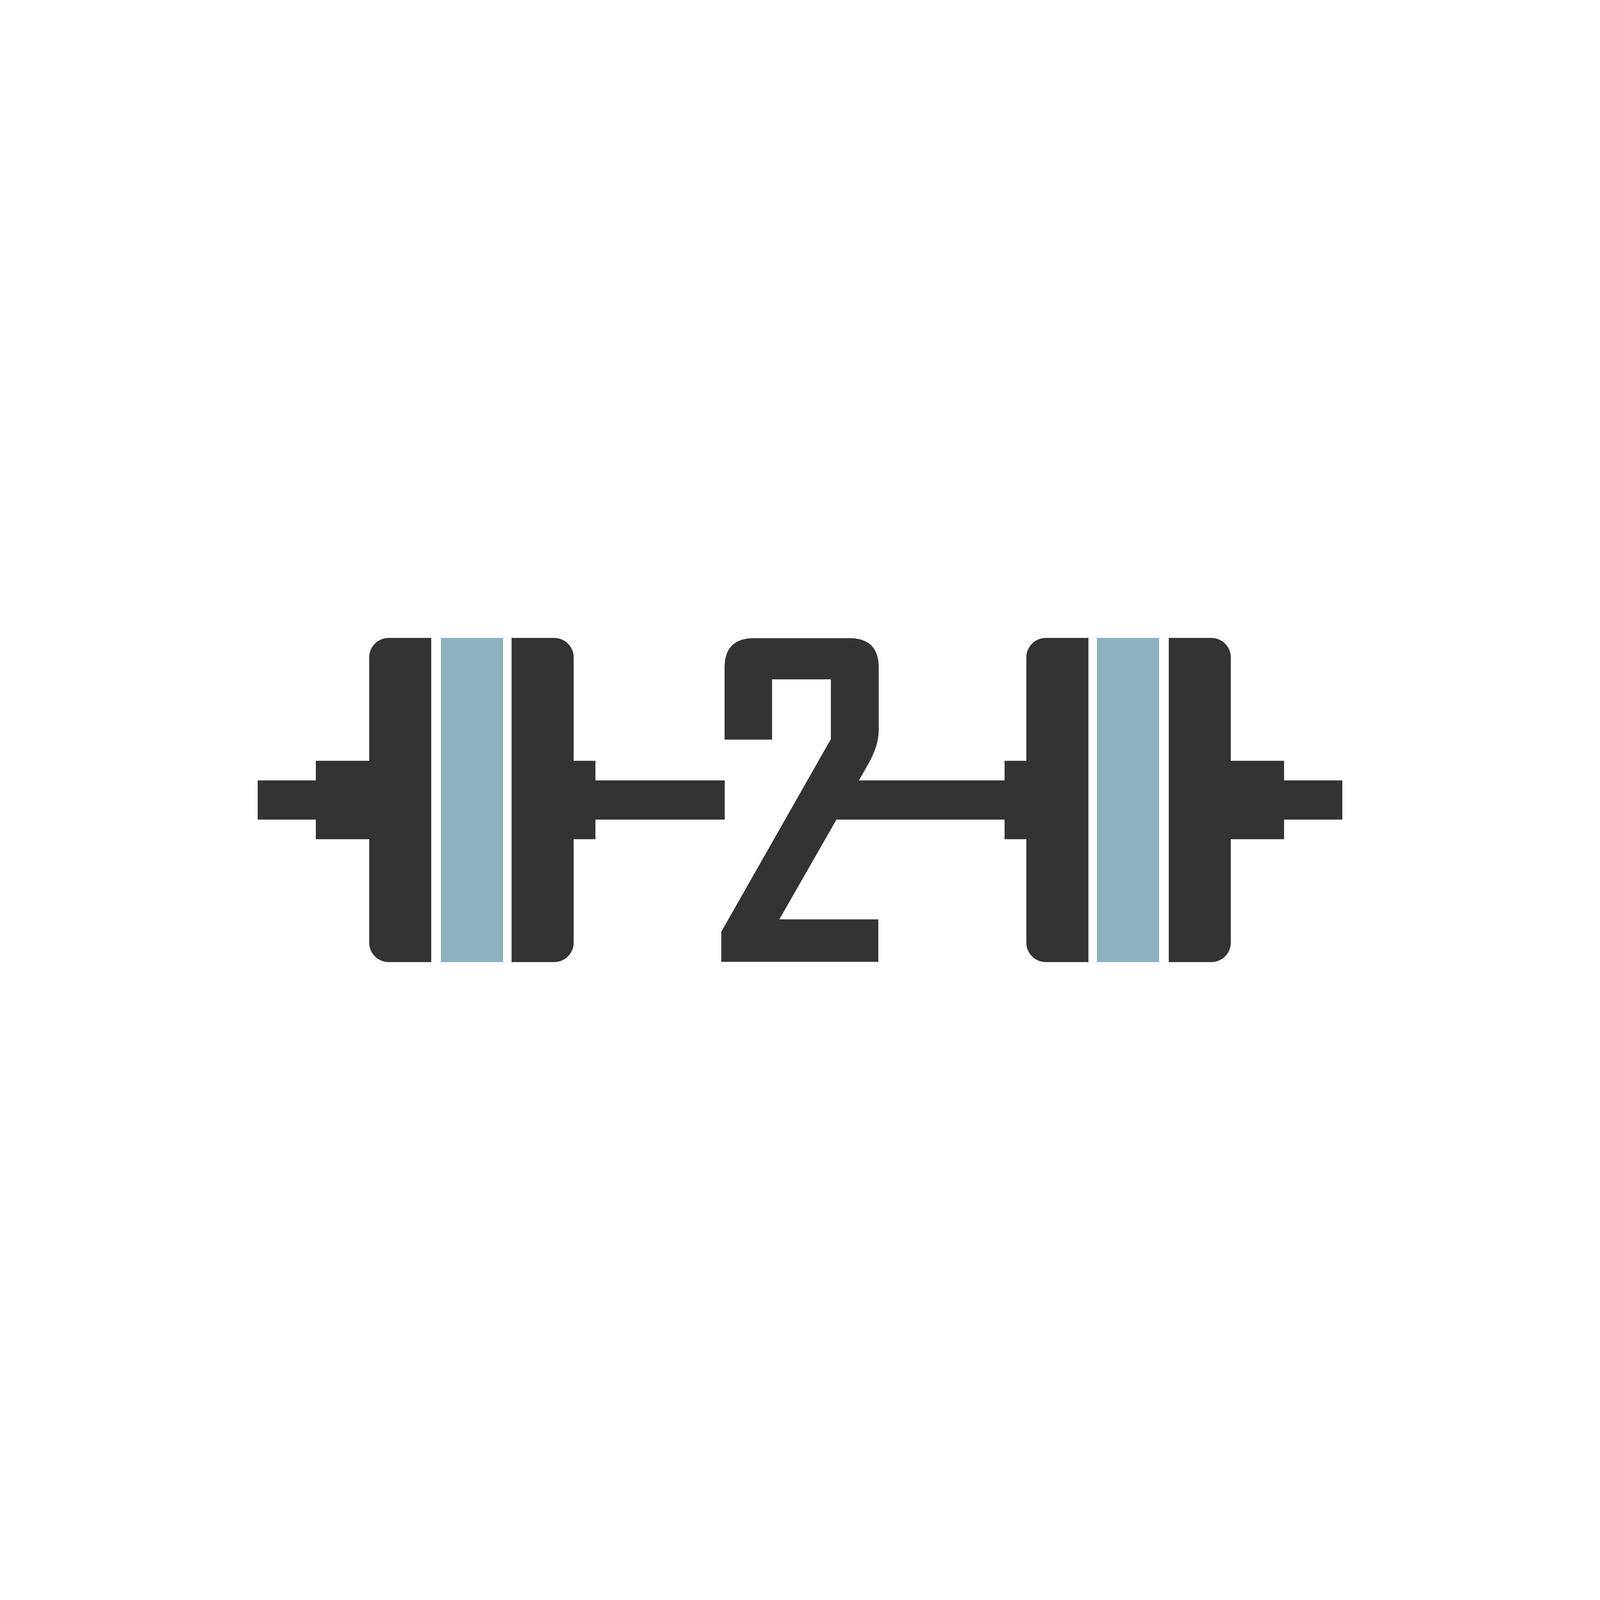 Number 2 with barbell icon fitness design template by bellaxbudhong3